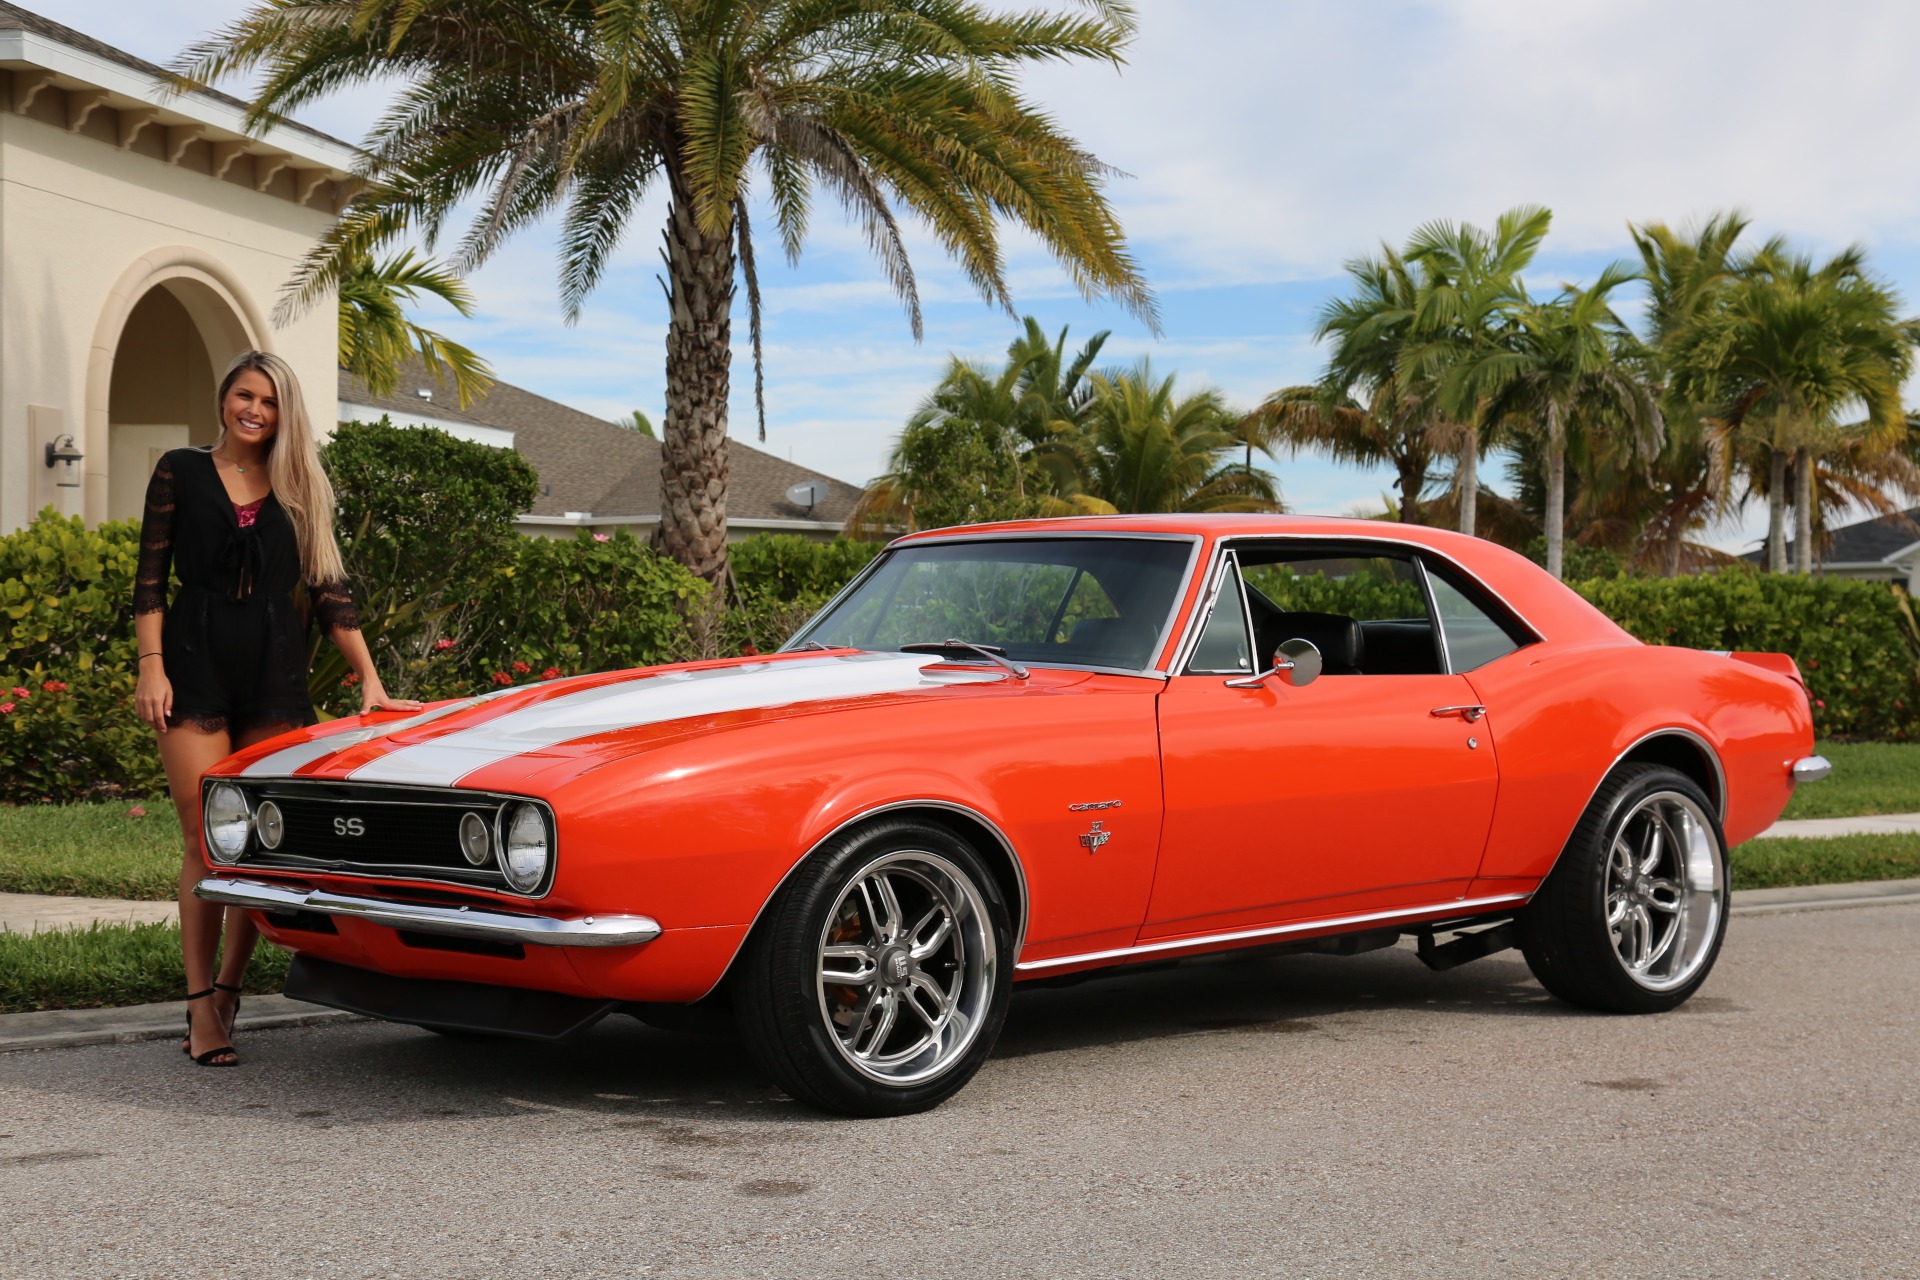 Used 1967 Chevy Camaro V8 Auto for sale Sold at Muscle Cars for Sale Inc. in Fort Myers FL 33912 8